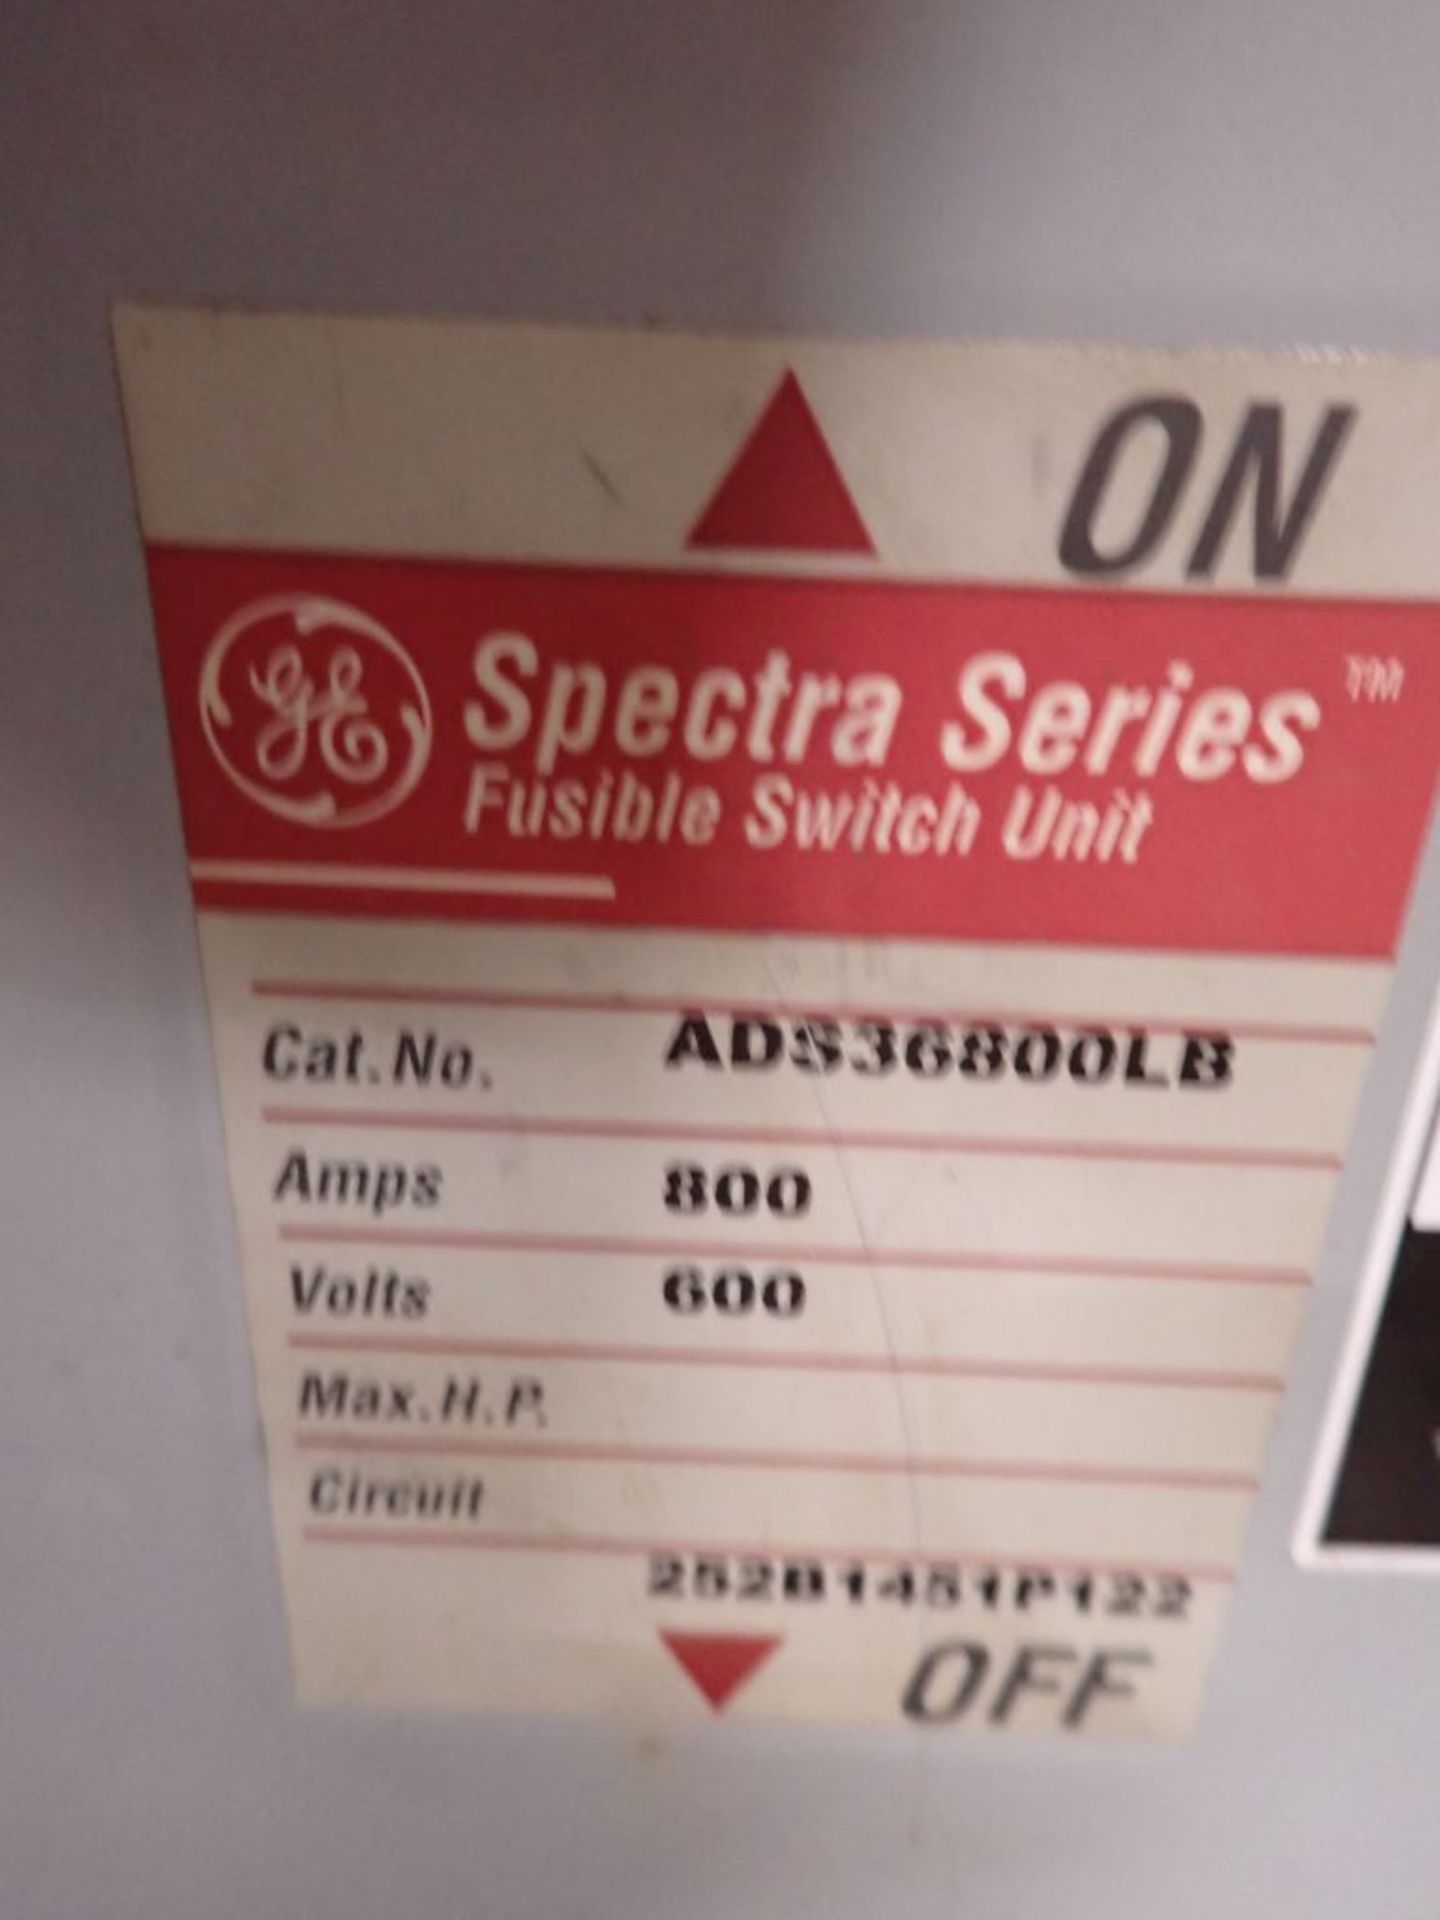 GE Spectra Series Fusible Switch Unit - Image 10 of 18